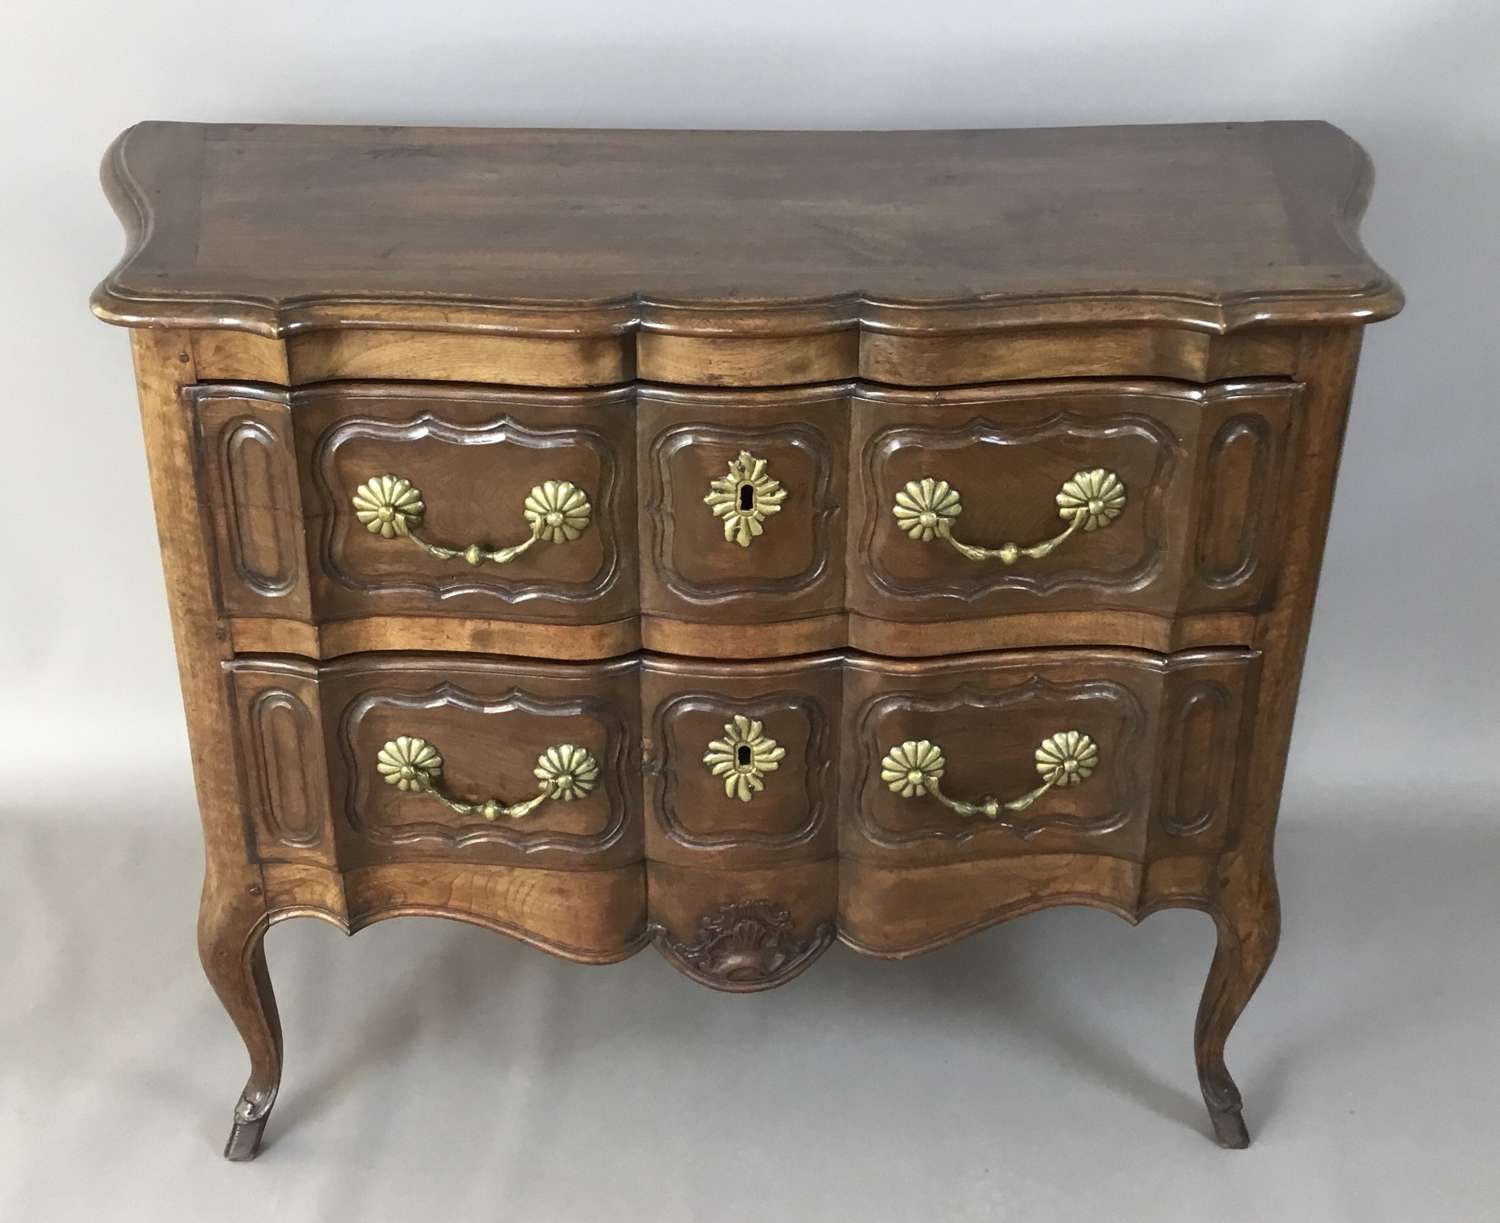 C18th French provincial walnut serpentine commode